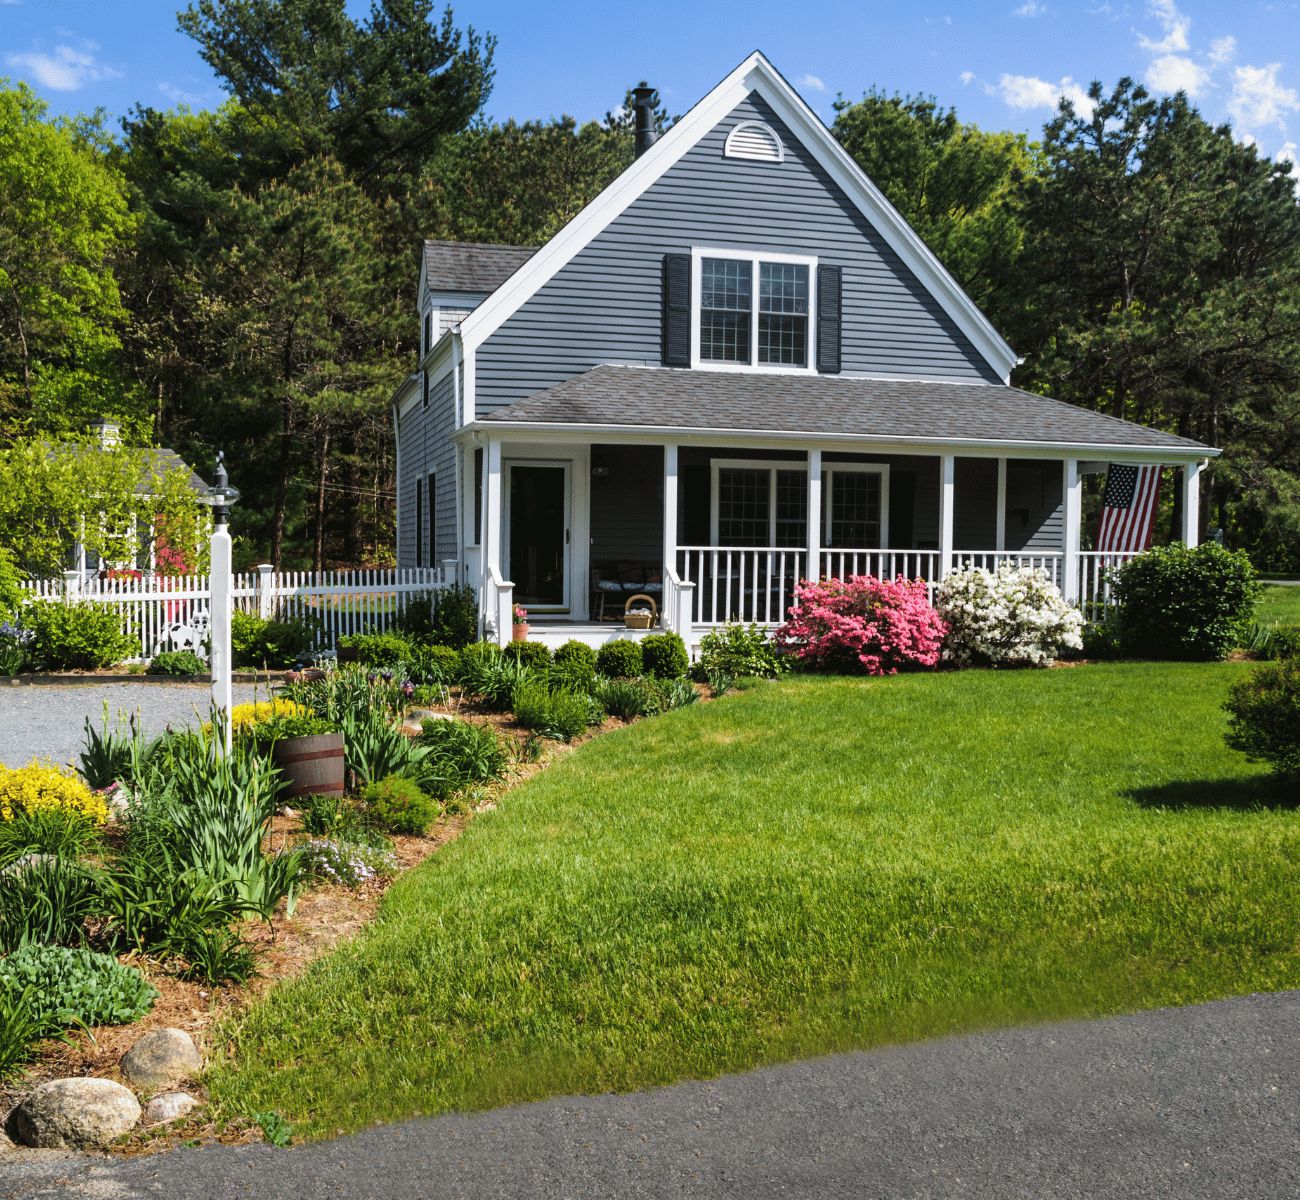 7 Best Ways to Boost Curb Appeal